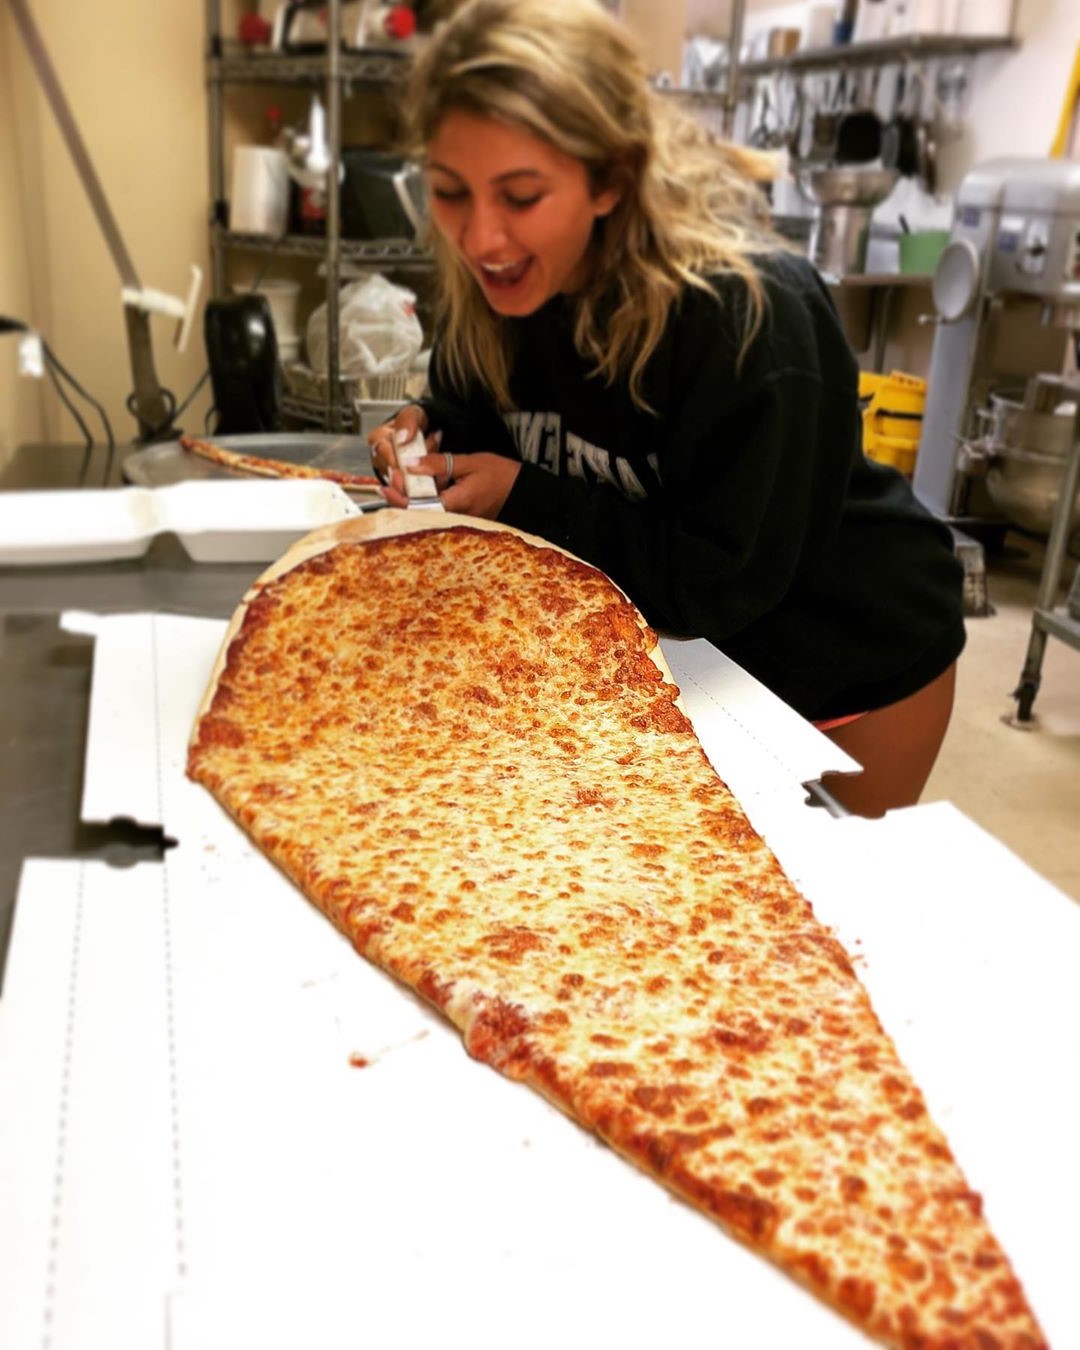 Megapizza challenge | New Foodie Trend Is A Giant Pizza Slice – The Biggest You've Seen | Her Beauty